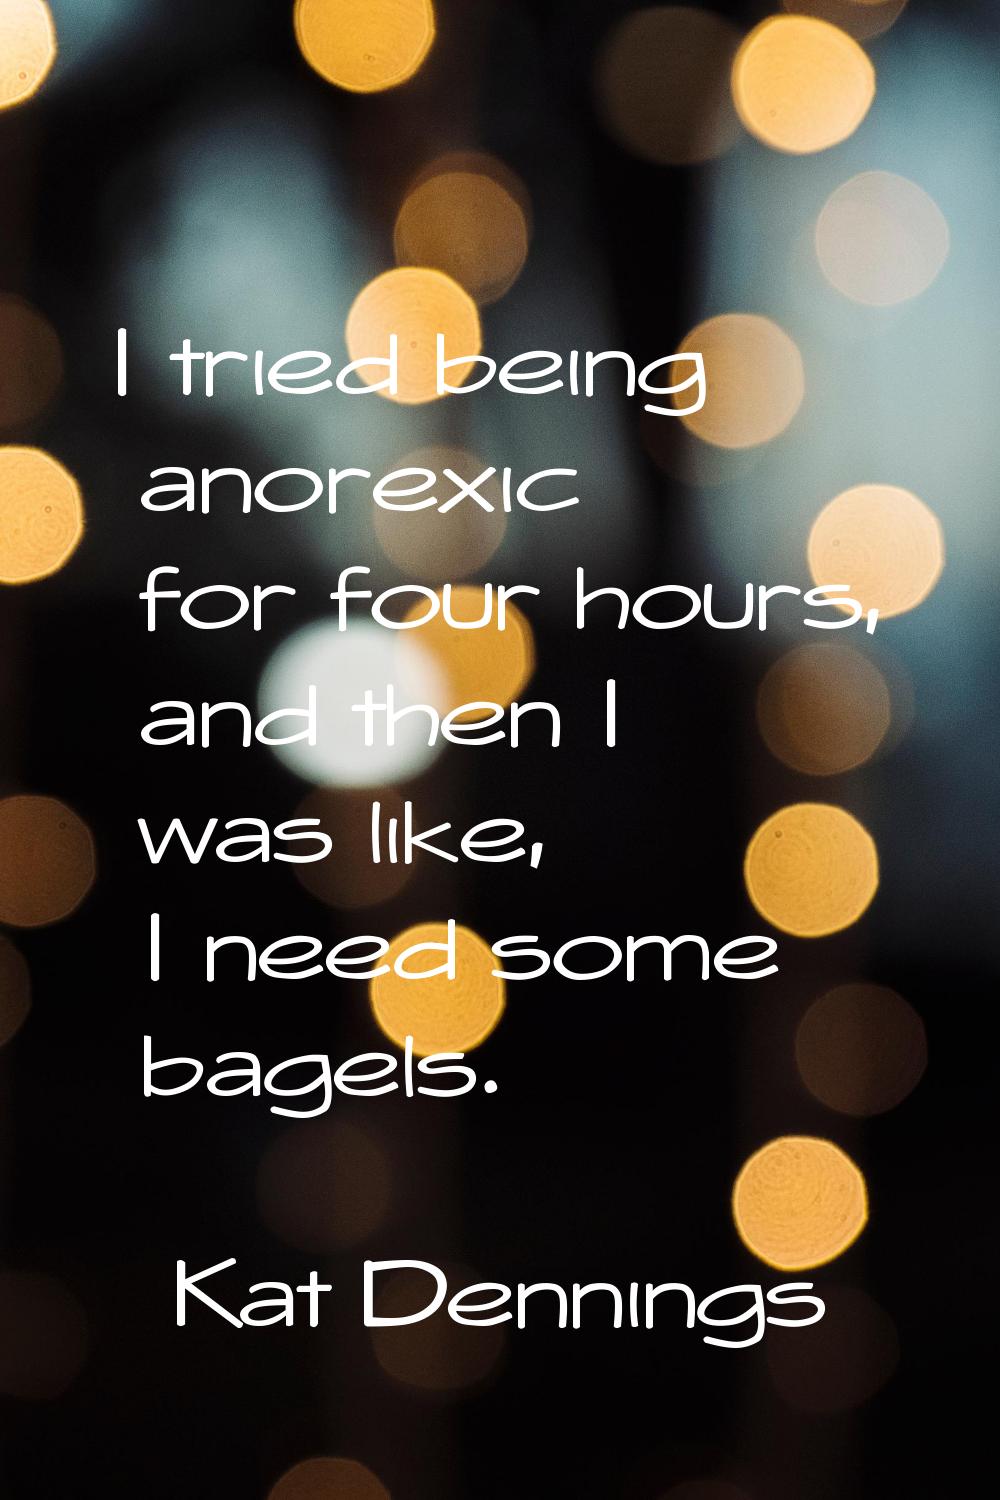 I tried being anorexic for four hours, and then I was like, I need some bagels.